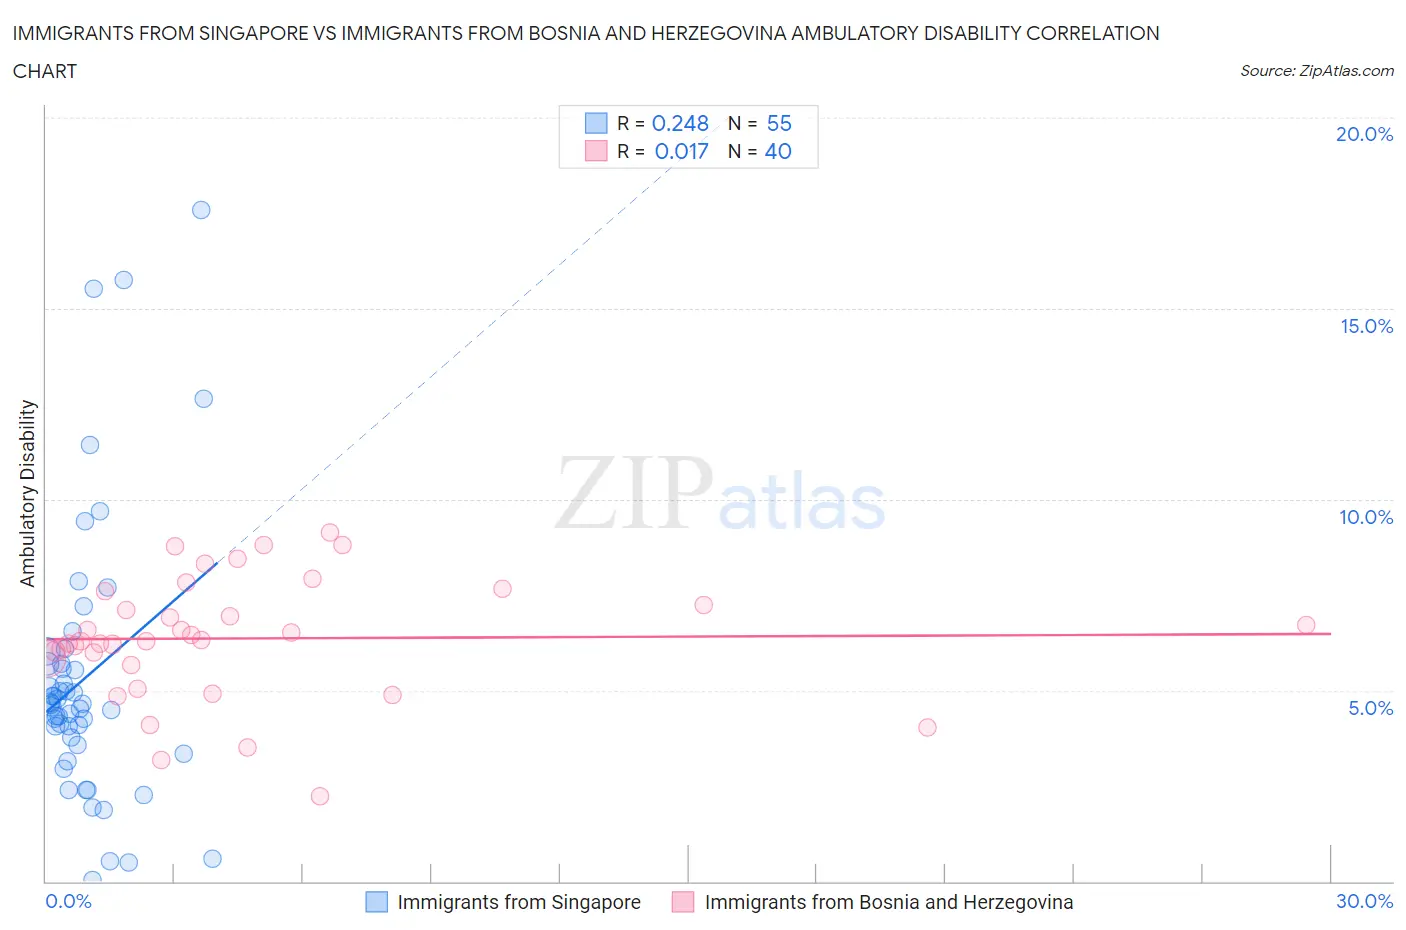 Immigrants from Singapore vs Immigrants from Bosnia and Herzegovina Ambulatory Disability